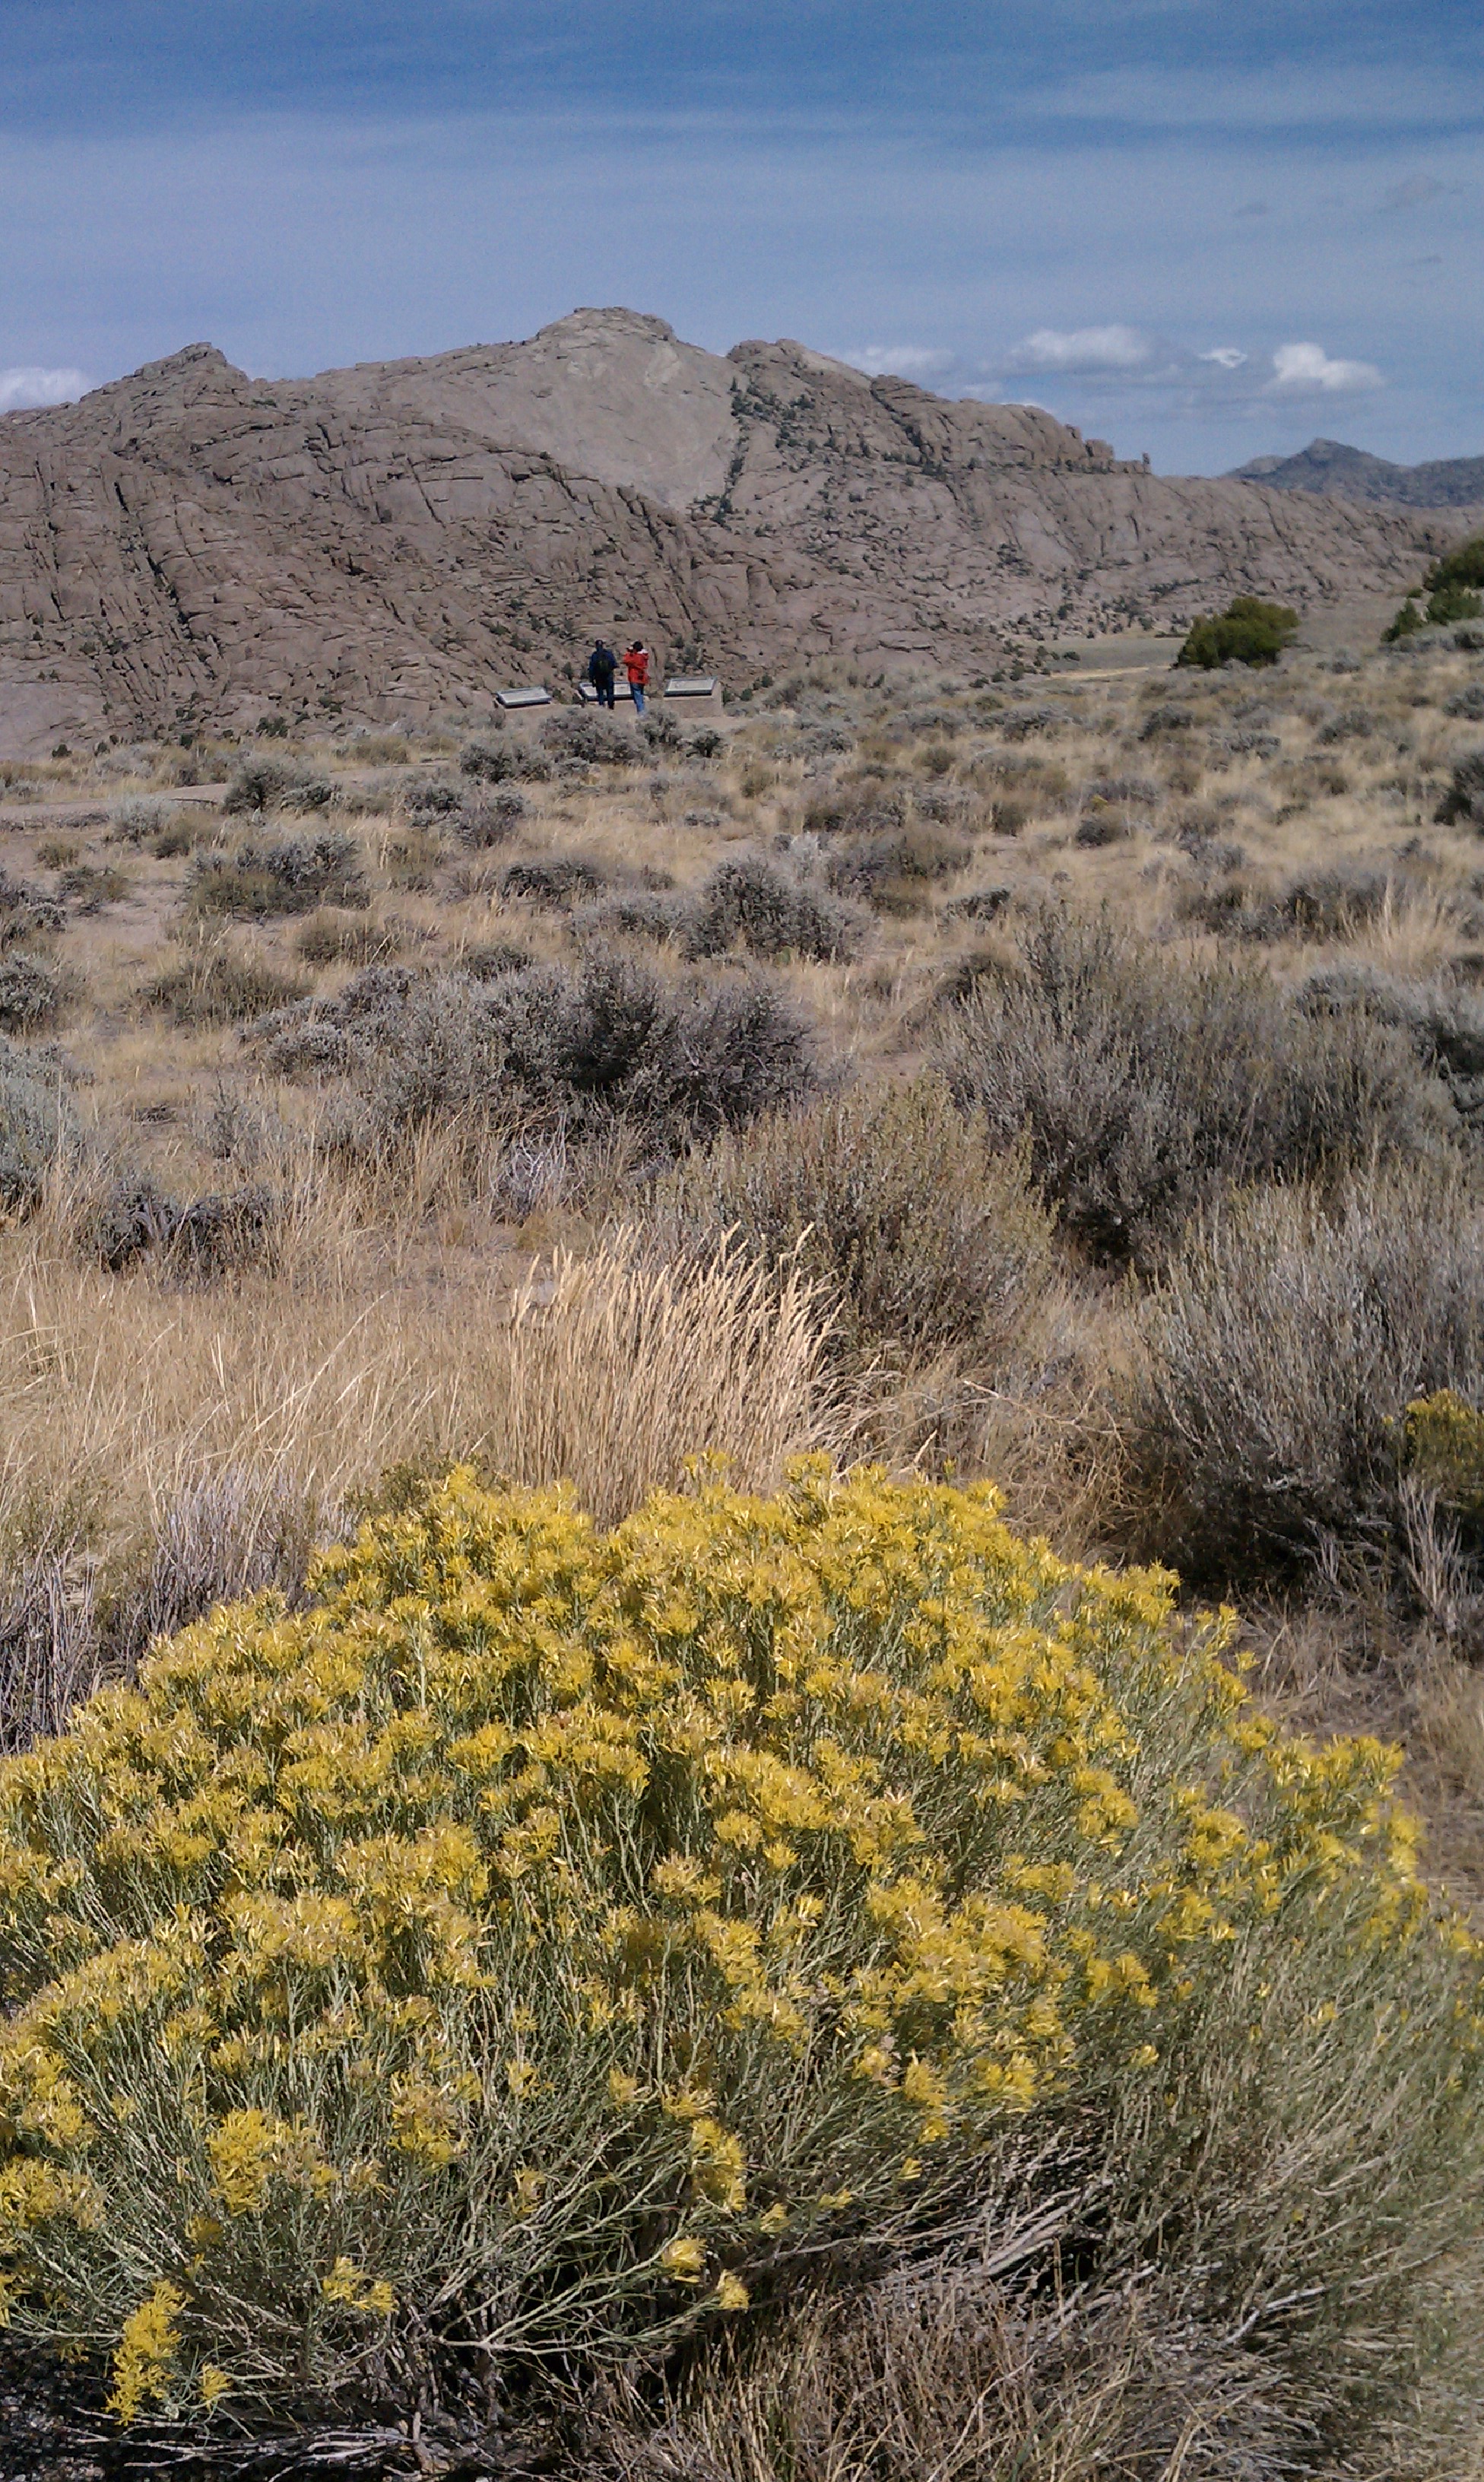 A large yellow flowering desert shrub in front of sagebrush and a large rock buttress.